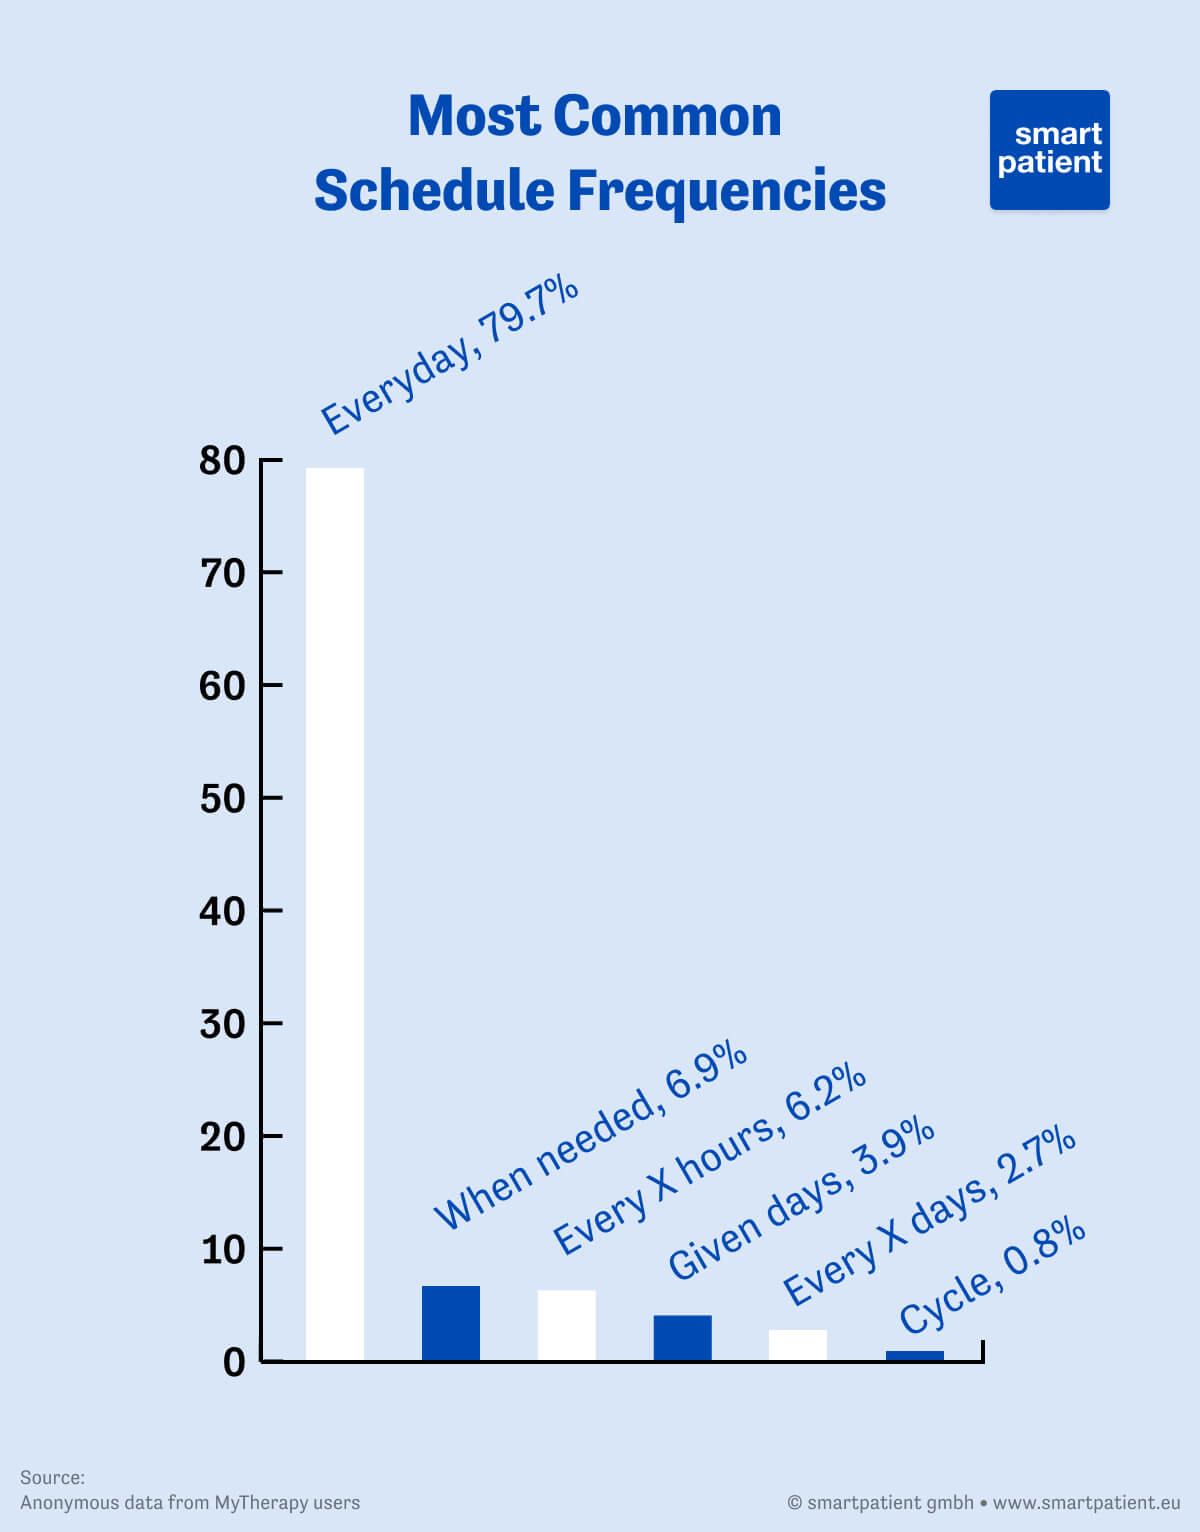 Graph showing the most common intake patterns for medications scheduled by MyTherapy users, Everyday: 79.9%, When needed, 6.9%, Given days: 3.9%, Every X days: 2.7%, Cycle: 0.8%